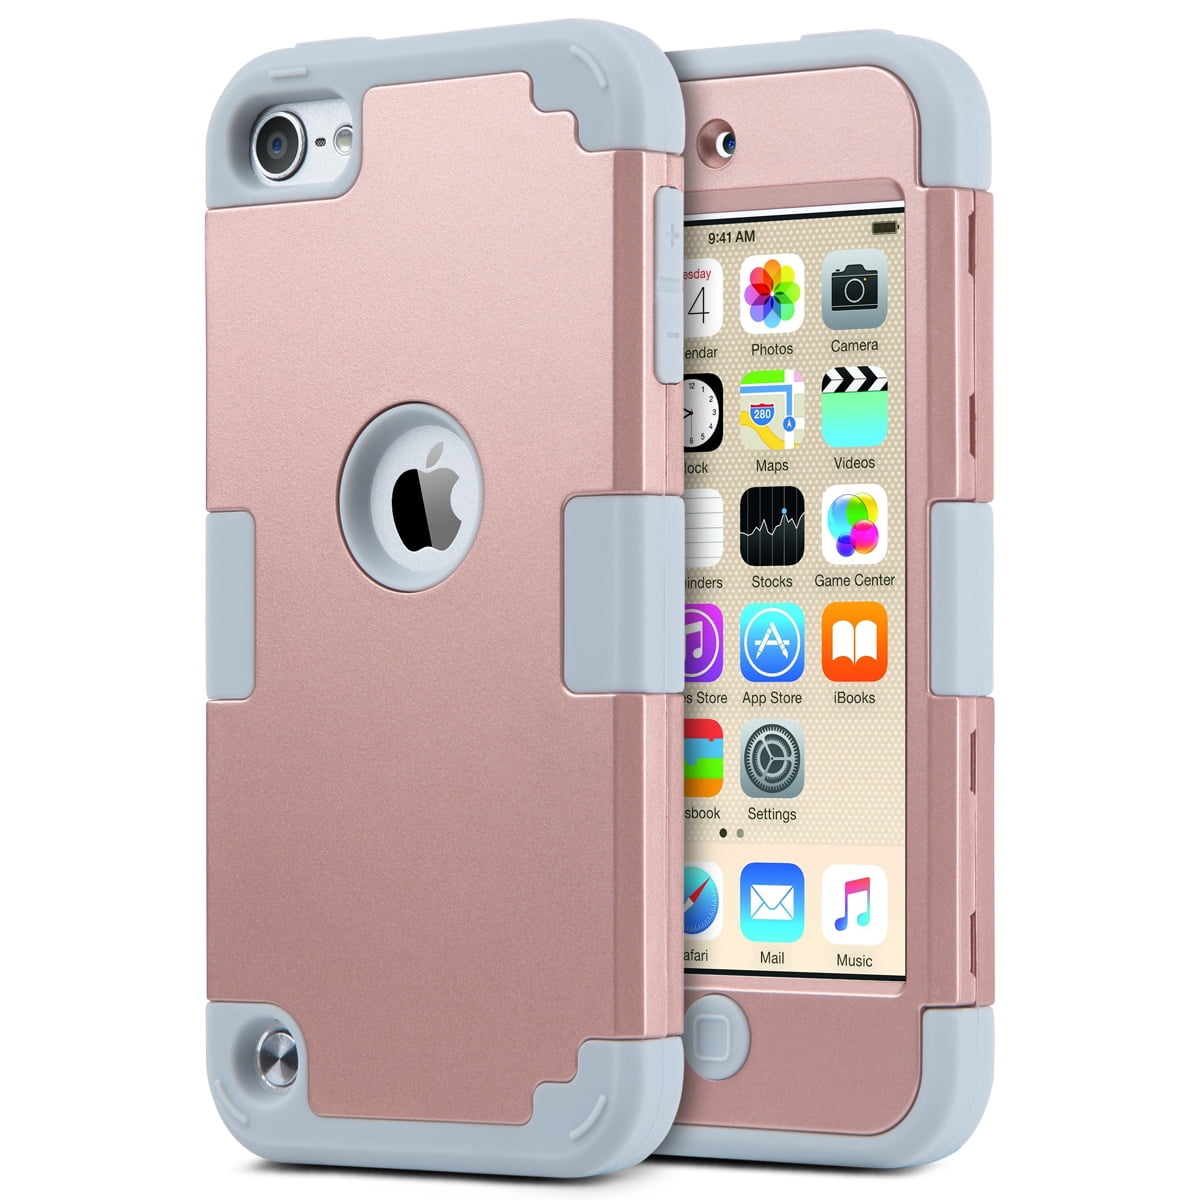 Ipod 6 Case Ipod Touch 5 Case Ulak 3 Piece Shock Absorbing Hybrid Phone Hard Case Cover For Apple Ipod Touch 6 6th 5 5th Gen Rose Gold Grey Walmart Com Walmart Com